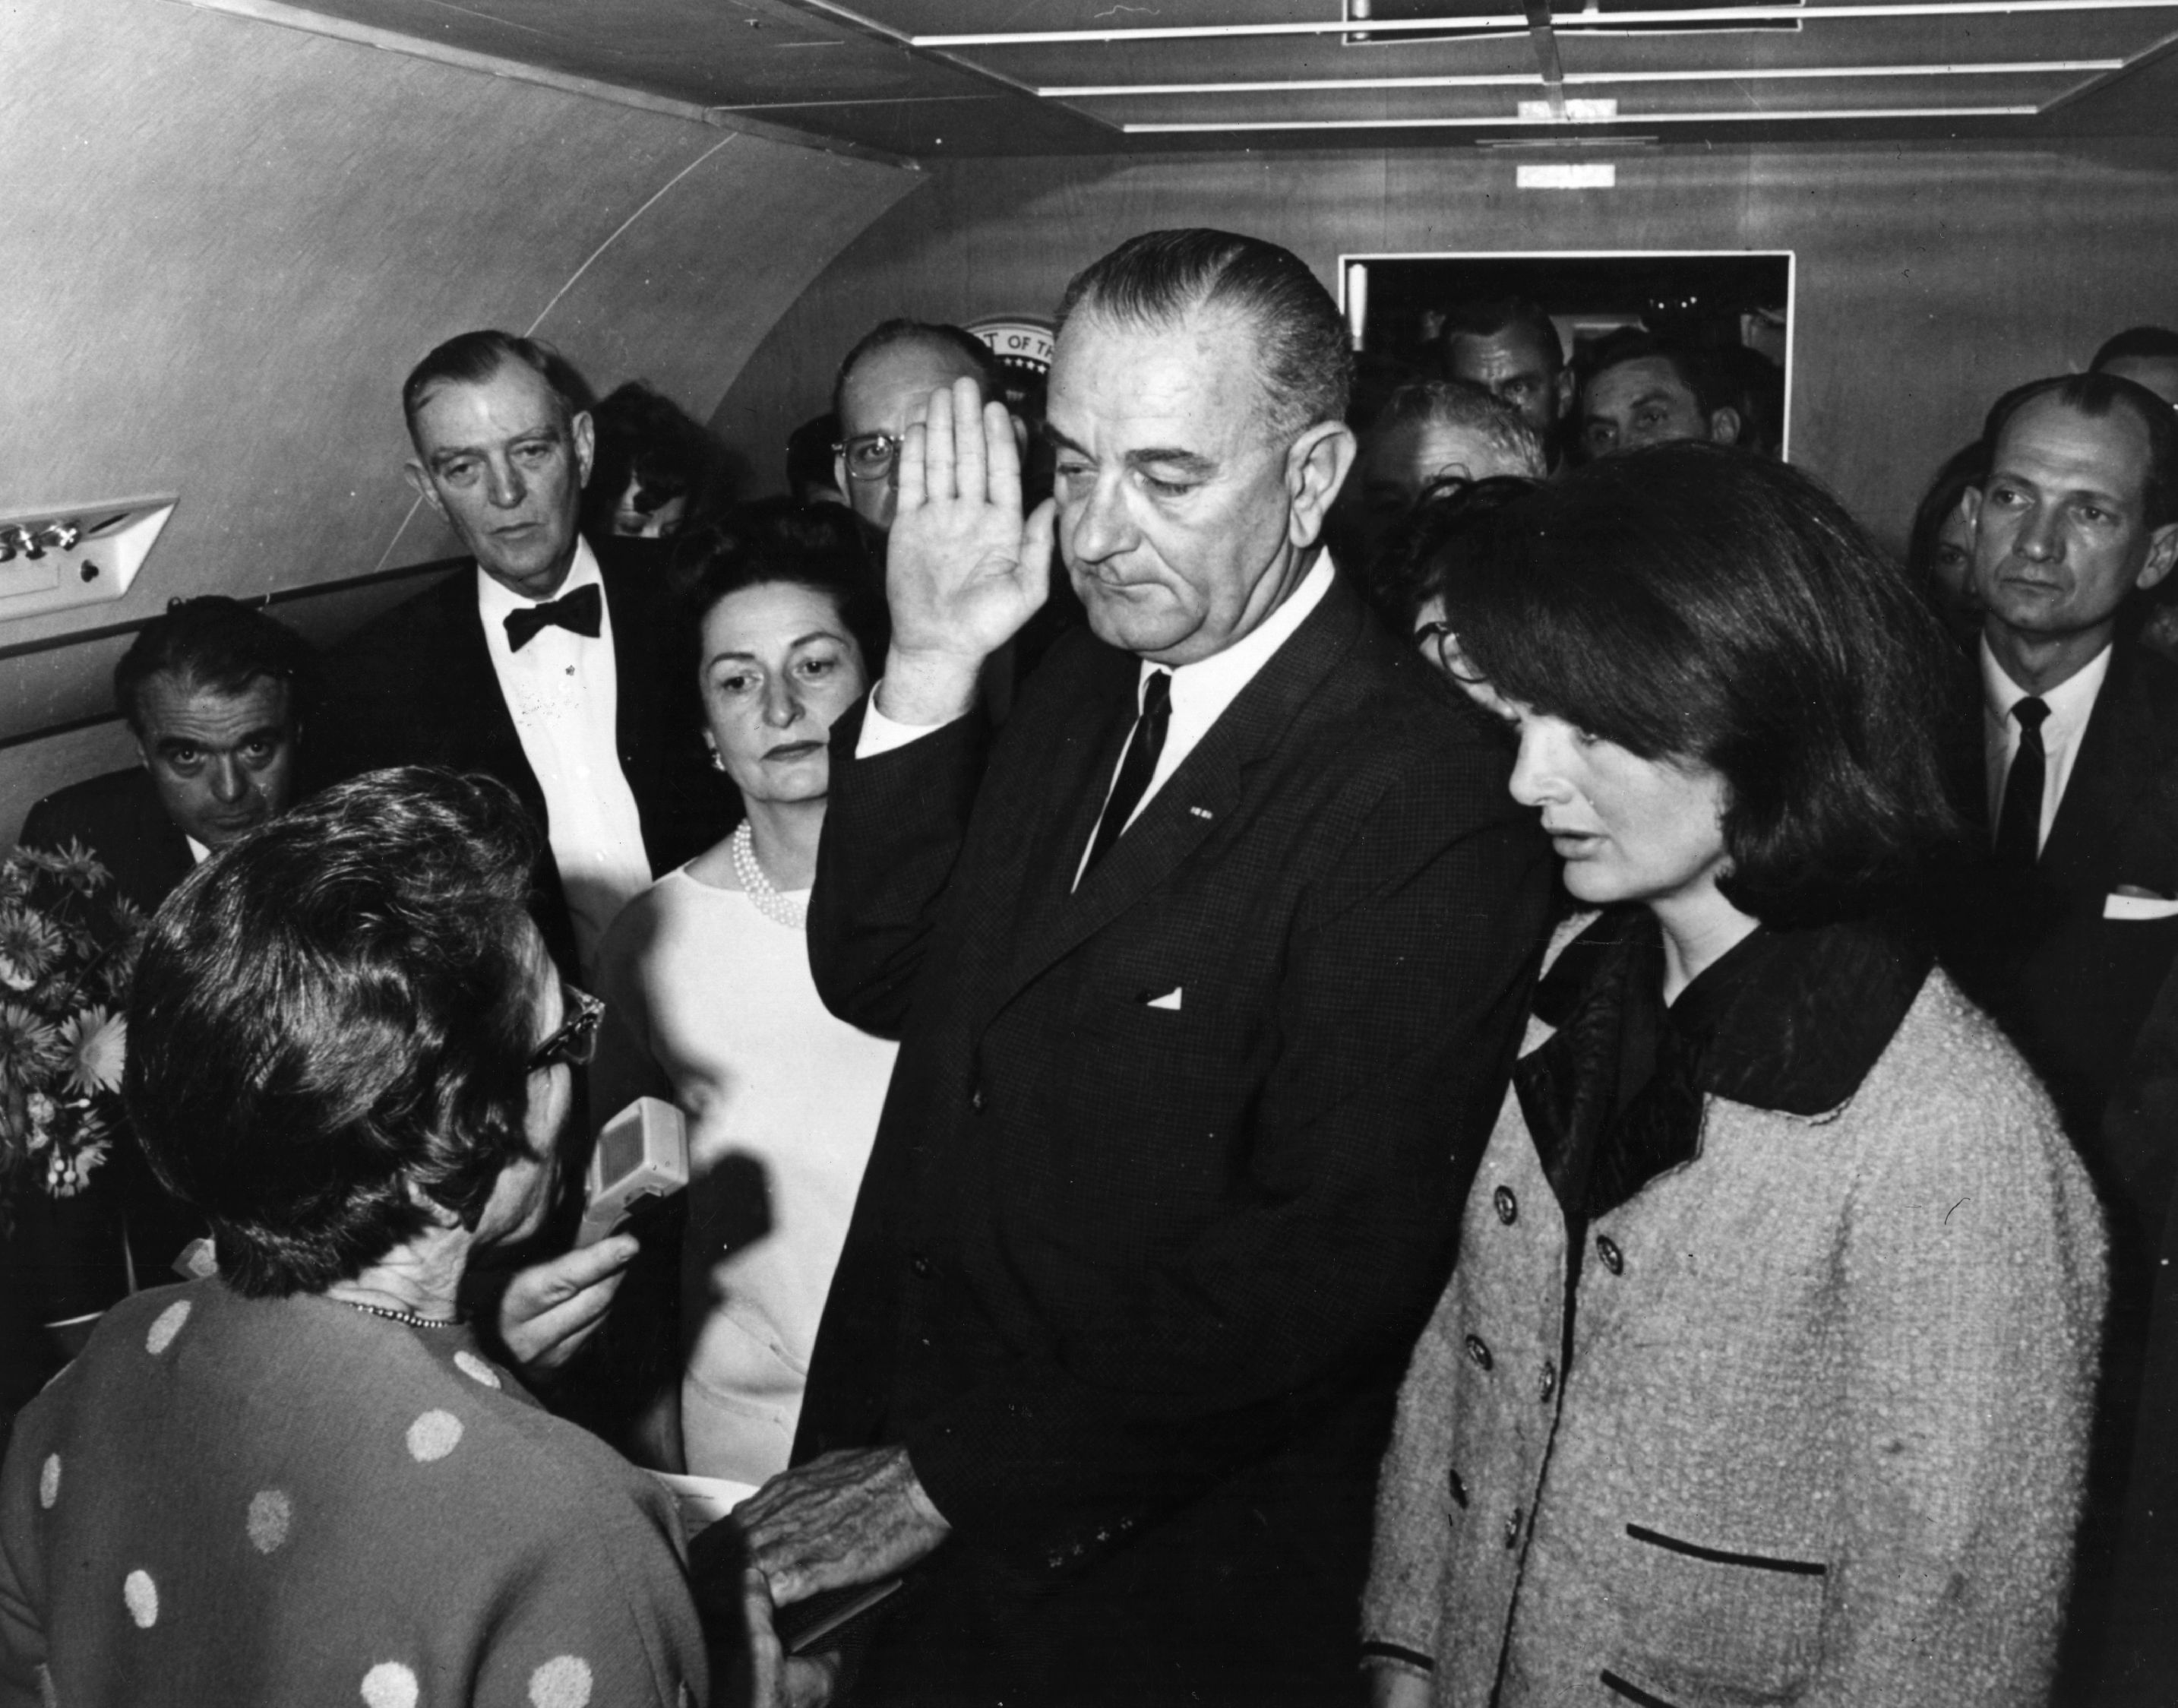 Lyndon Baines Johnson is sworn in as the 36th President of the United States of America on board the presdential aeroplane, after the assassination of President John F Kennedy. Mrs Johnson is behind him, left, and to his right is the grief stricken Jackie Kennedy